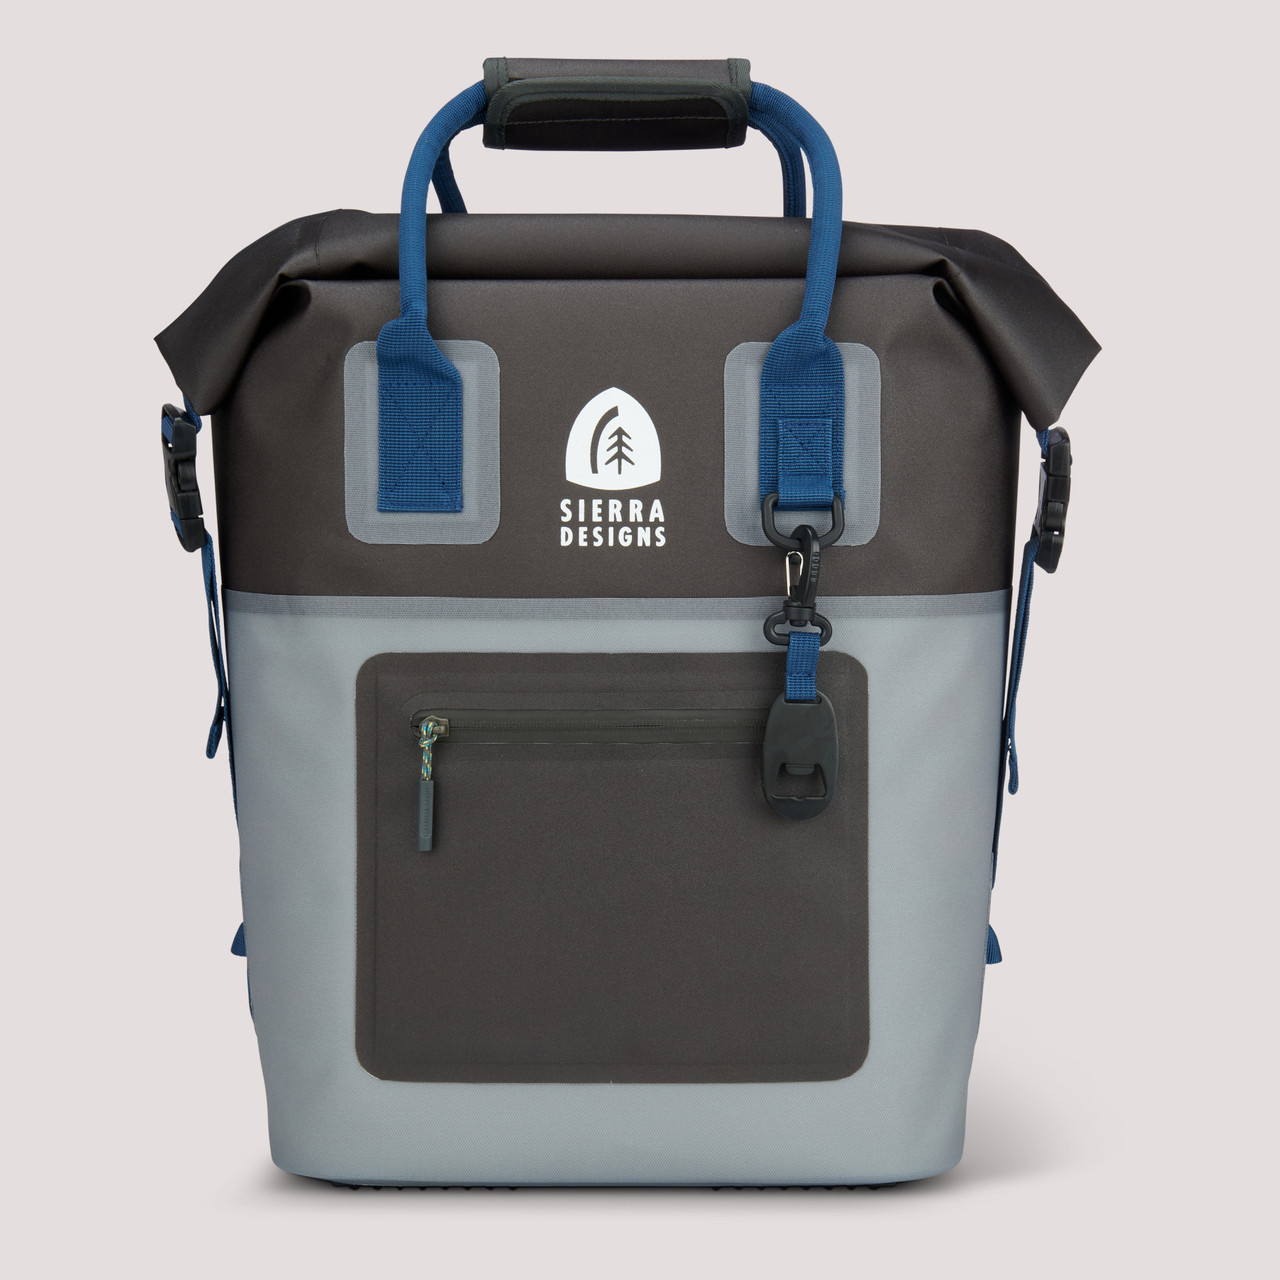 Sierra Designs Grotto 20L Cooler Pack, grey/blue, side view, closed